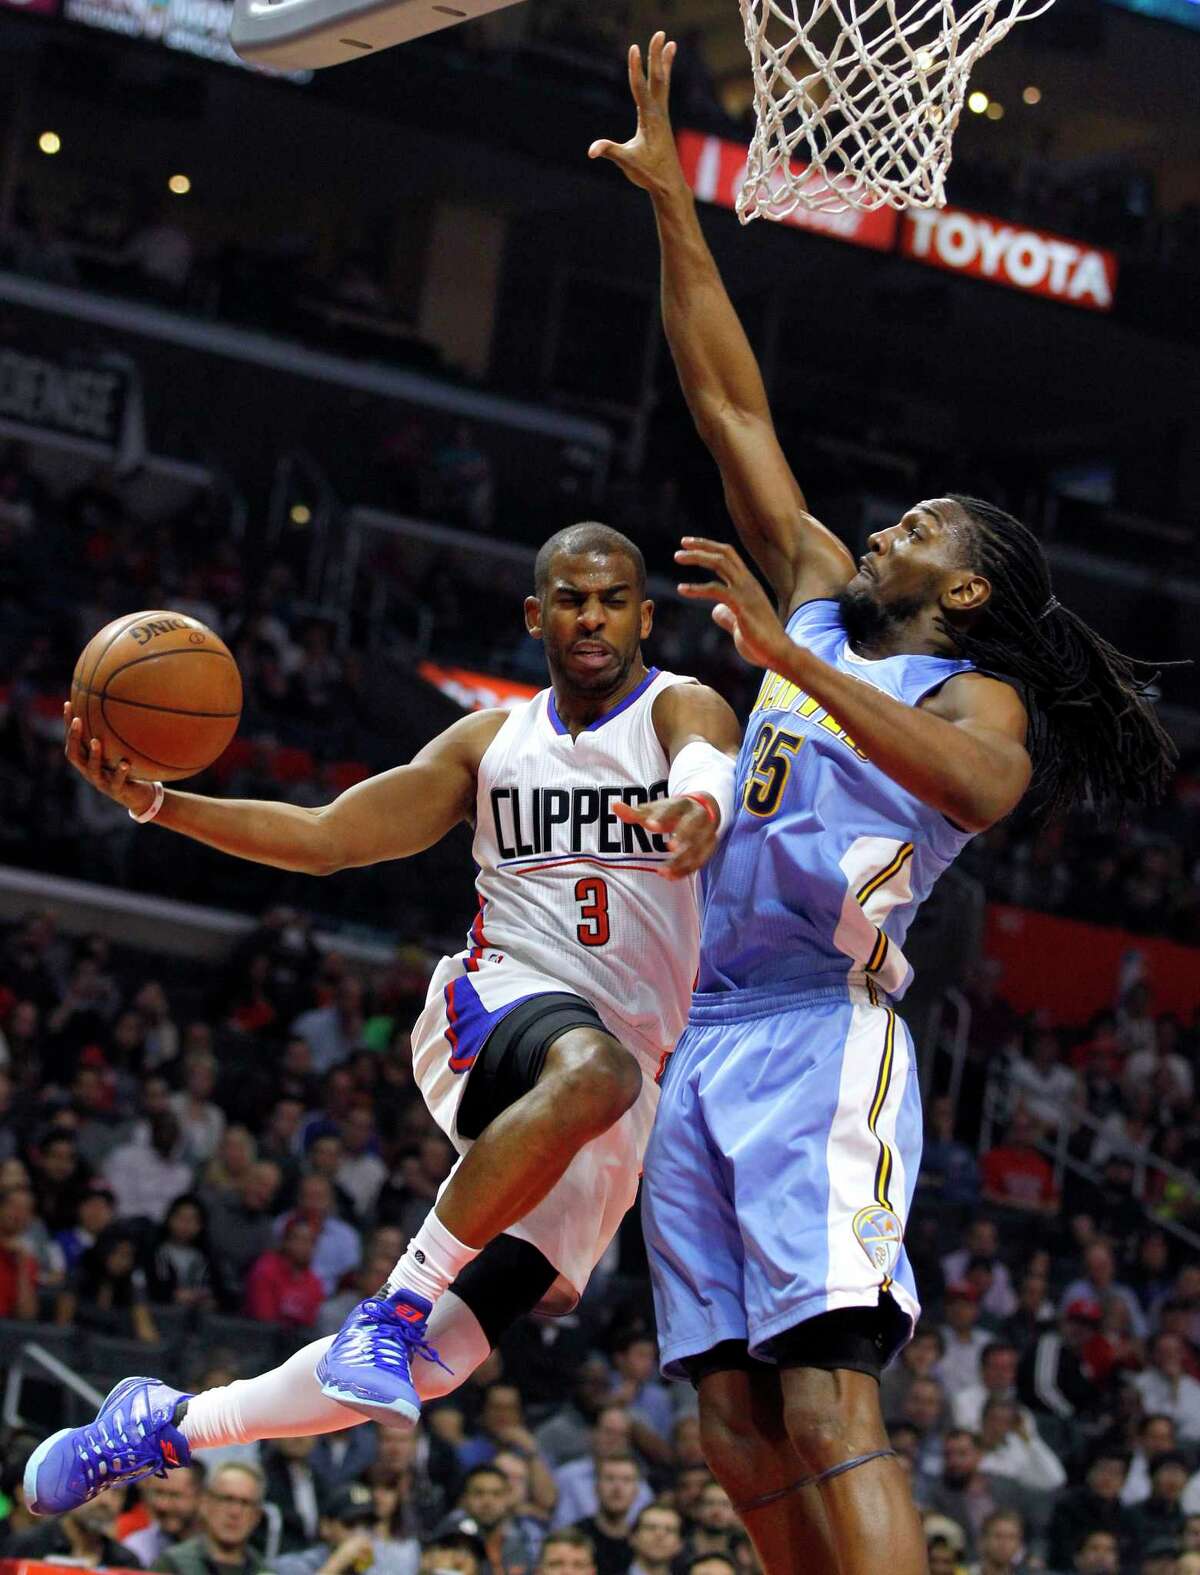 FILE - In this Feb. 24, 2016, file photo, Los Angeles Clippers guard Chris Paul (3) goes up under the basket, next to Denver Nuggets forward Kenneth Faried (35) during the first half of an NBA basketball game in Los Angeles. The Houston Rockets have reached an agreement to trade for Los Angeles Clippers point guard Chris Paul according to a person familiar with the deal. The league source spoke to The Associated Press on Wednesday, June 28, 2017, on the condition of anonymity because the team hasn't finalized the trade. (AP Photo/Alex Gallardo, File)